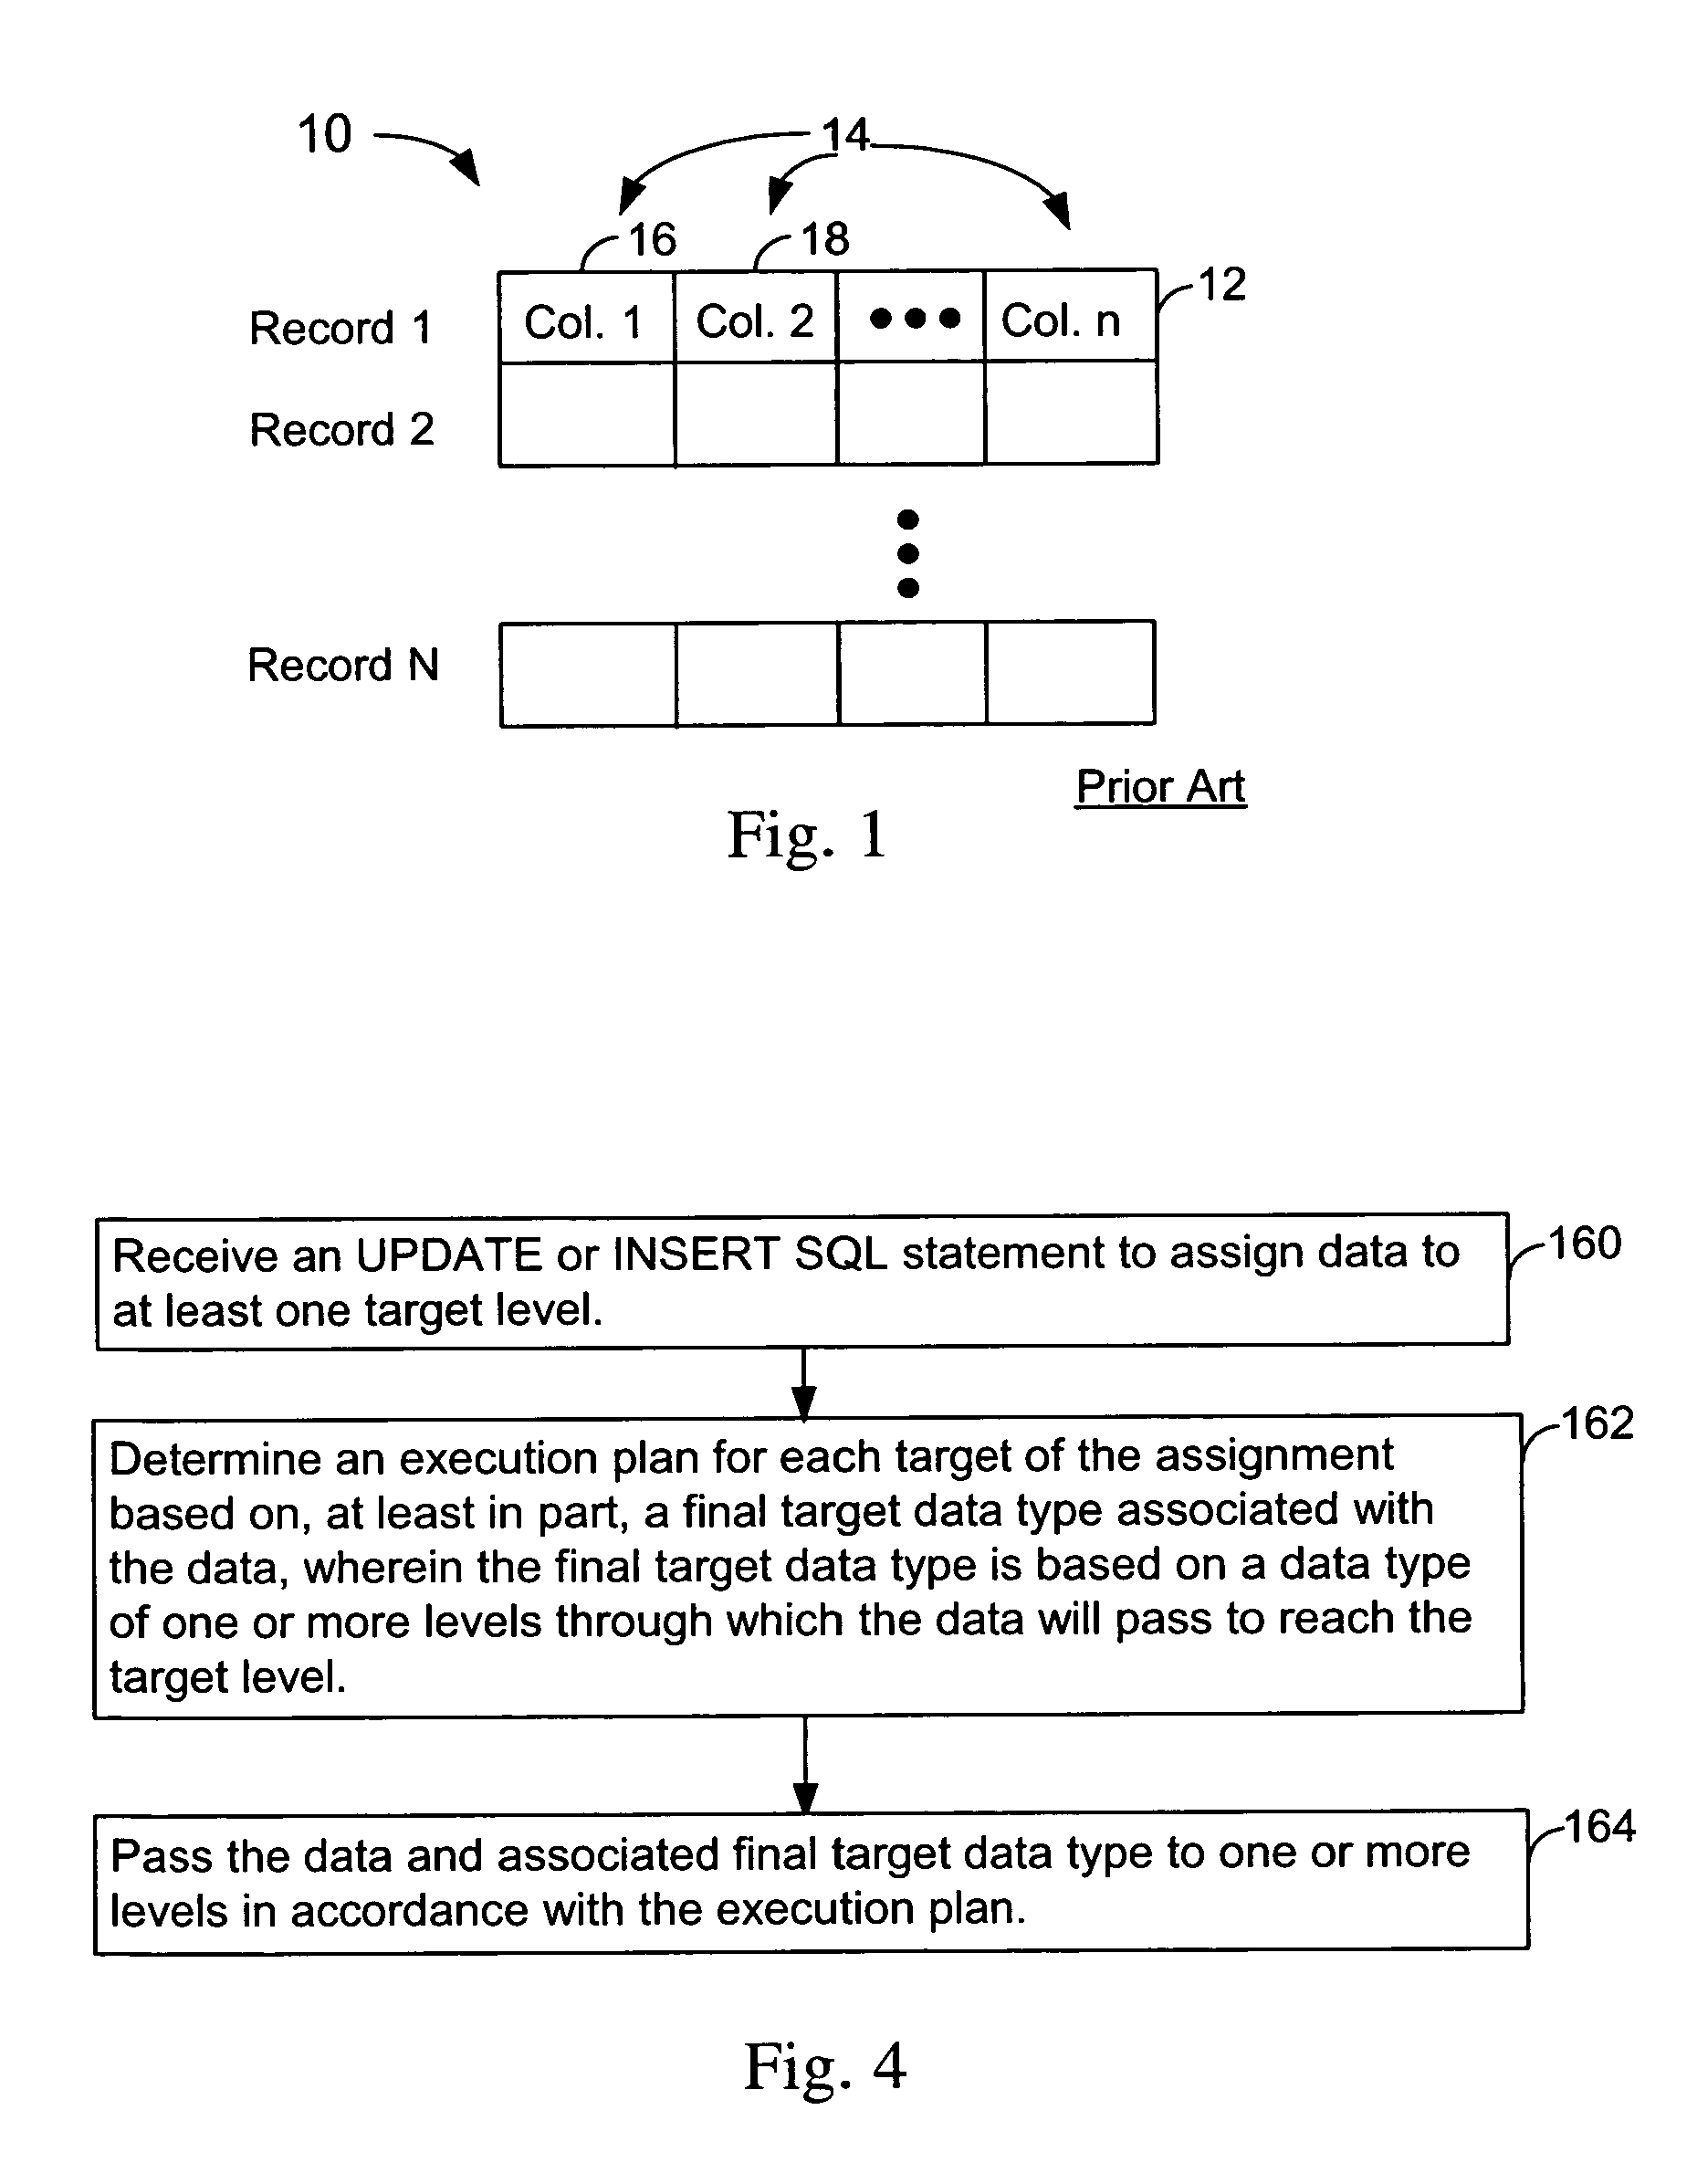 Technique for determining a target data type in a heterogeneous multi-level environment